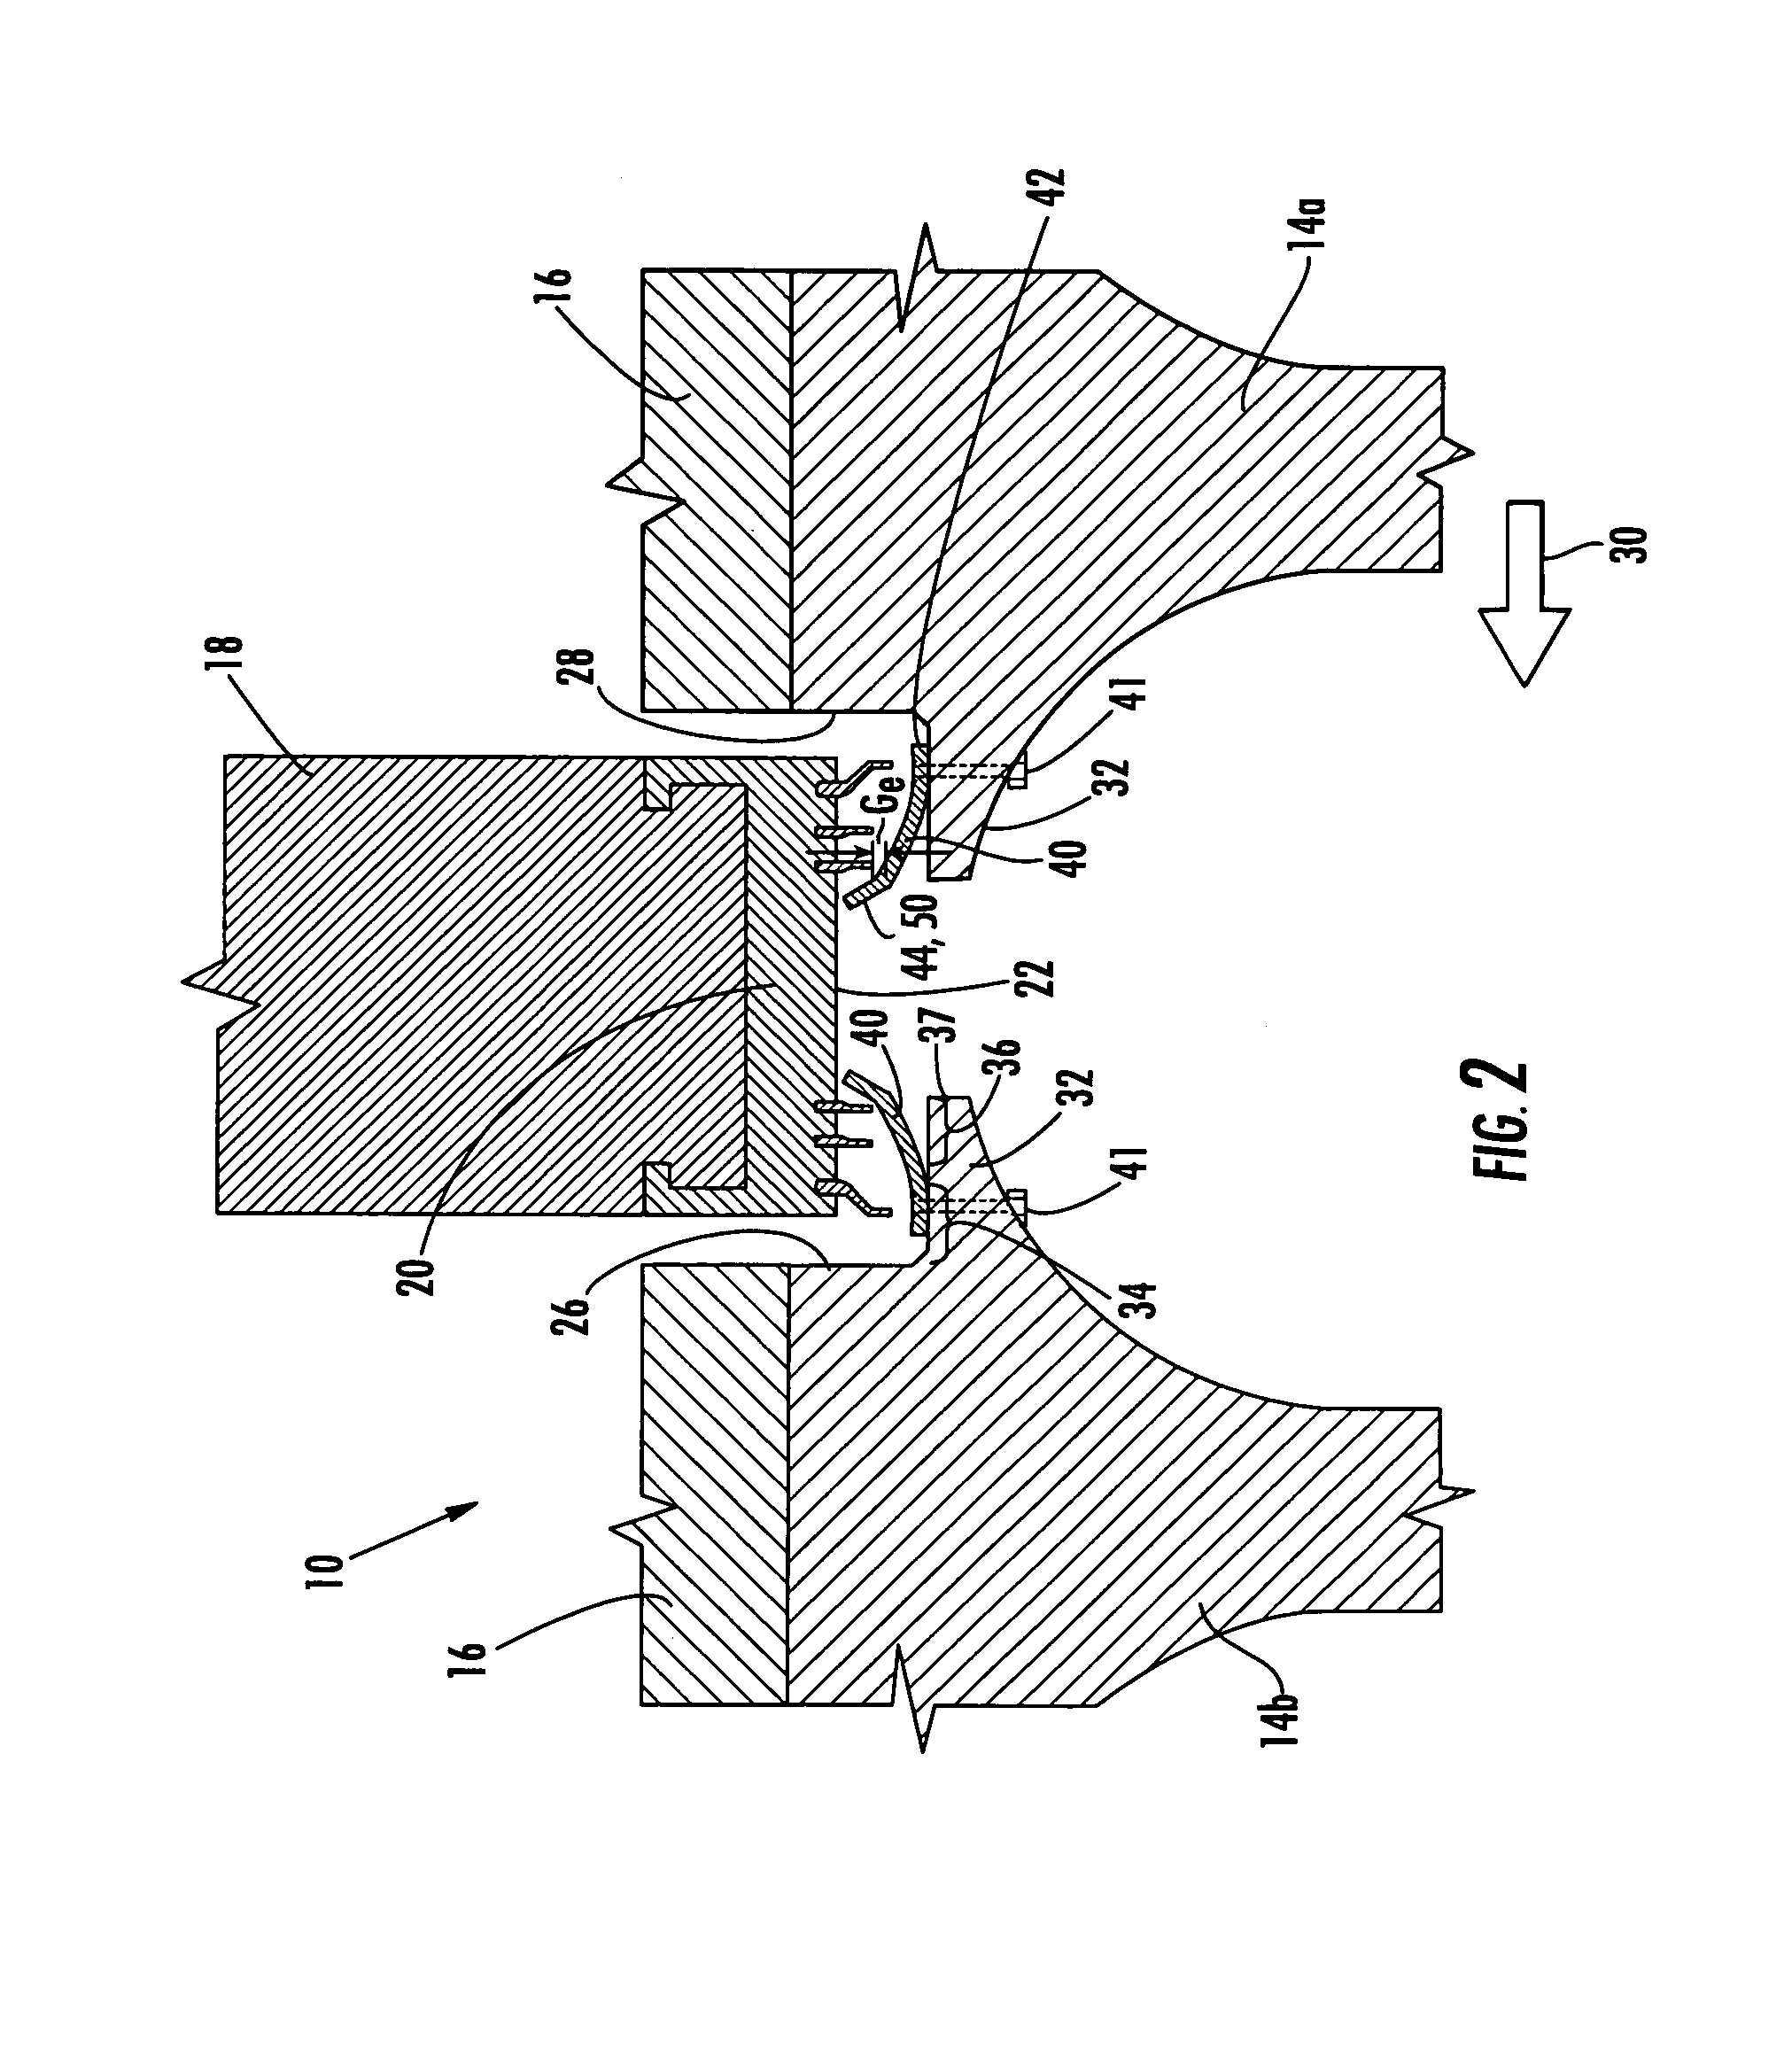 Compressor system with movable seal lands